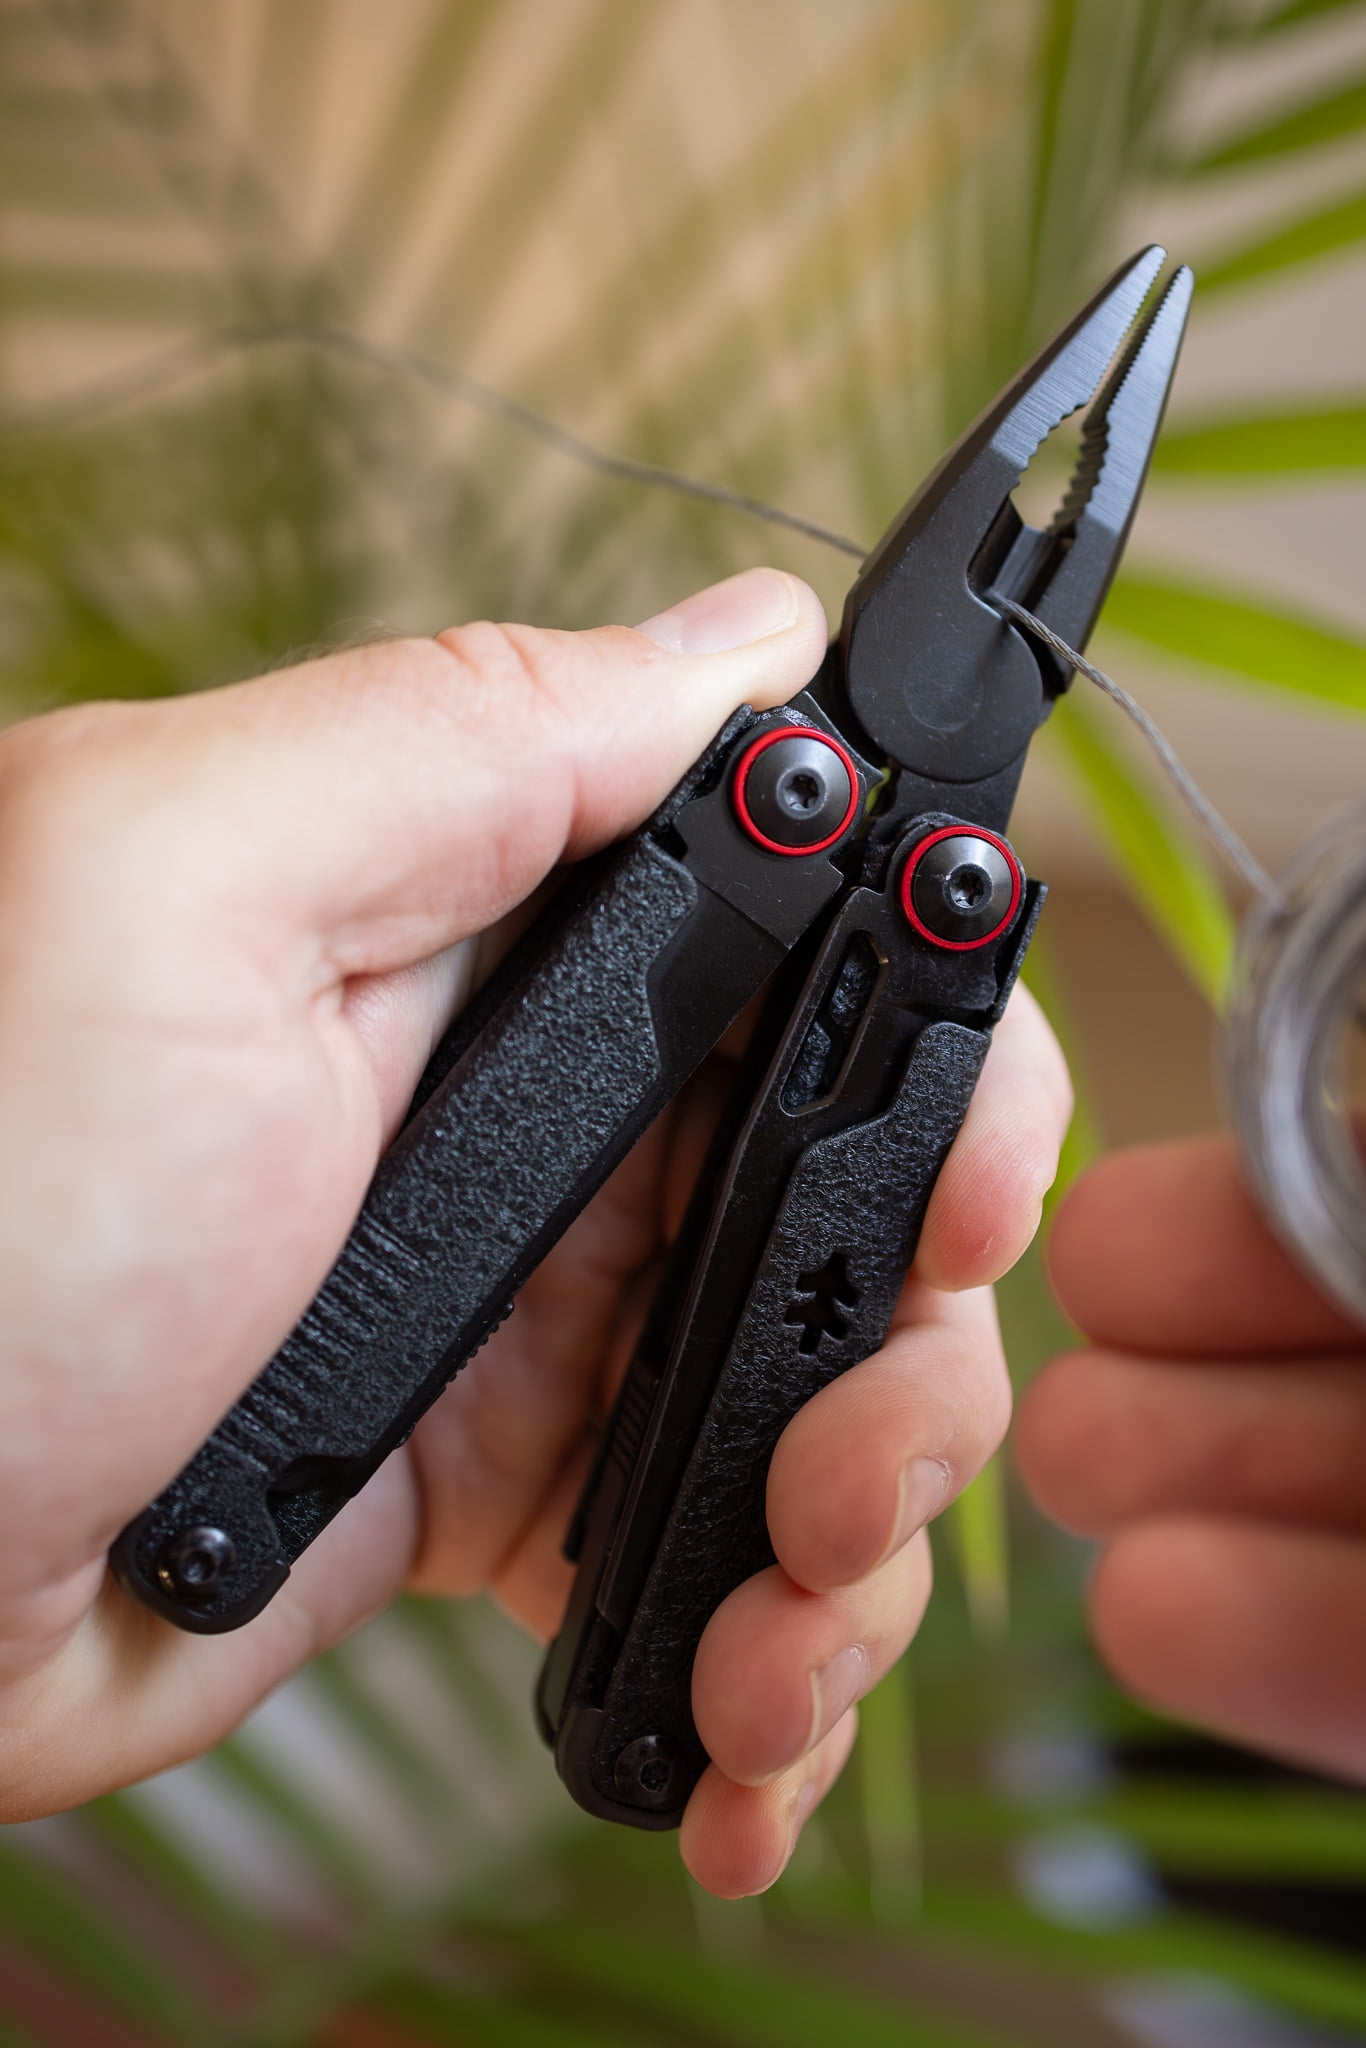 SWISS TECH 15 in 1 Multitool Folding Pliers Pocket Scissors Saw  Multifunctional EDC Tool Camping Outdoor Hiking